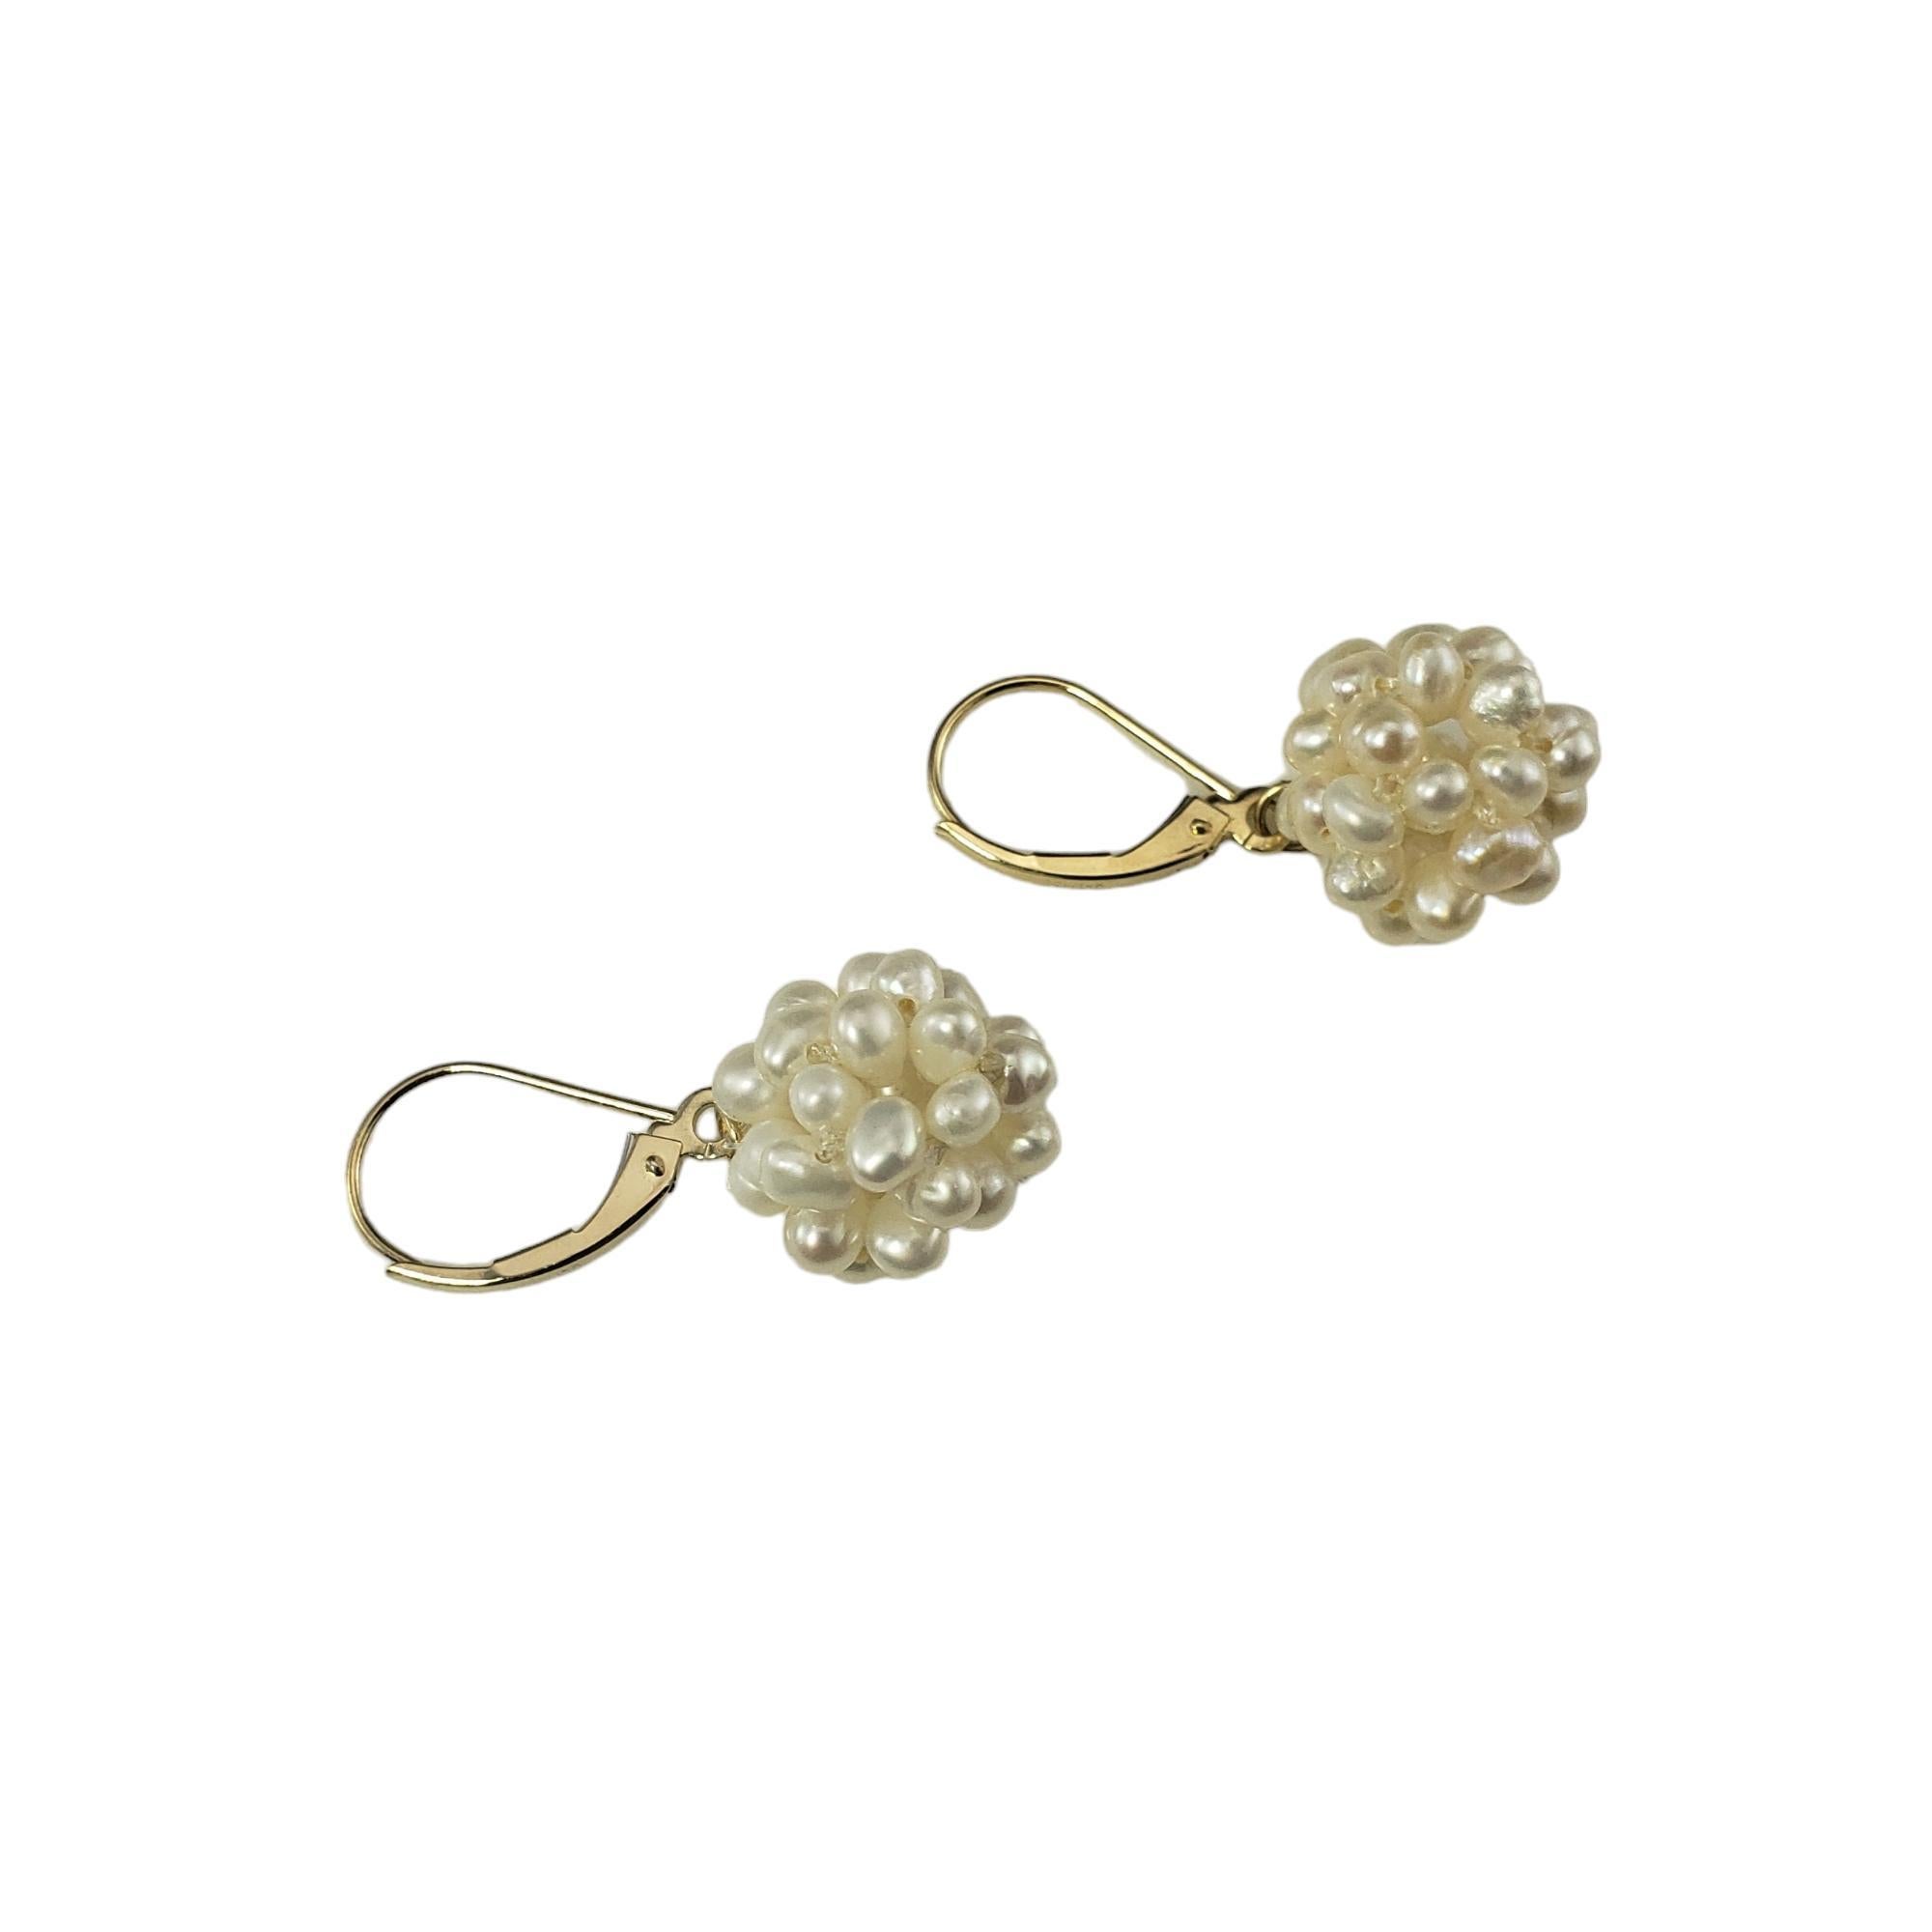 Vintage 14K Yellow Gold Freshwater Pearl Cluster Earrings-

These elegant dangle earrings feature a lovely cluster of freshwater pearls set in classic 14K yellow gold.

Size: 30 mm x 13 mm

Stamped:  JCM 14K

Weight: 2.2 dwt. / 3.4 gr.

Very good